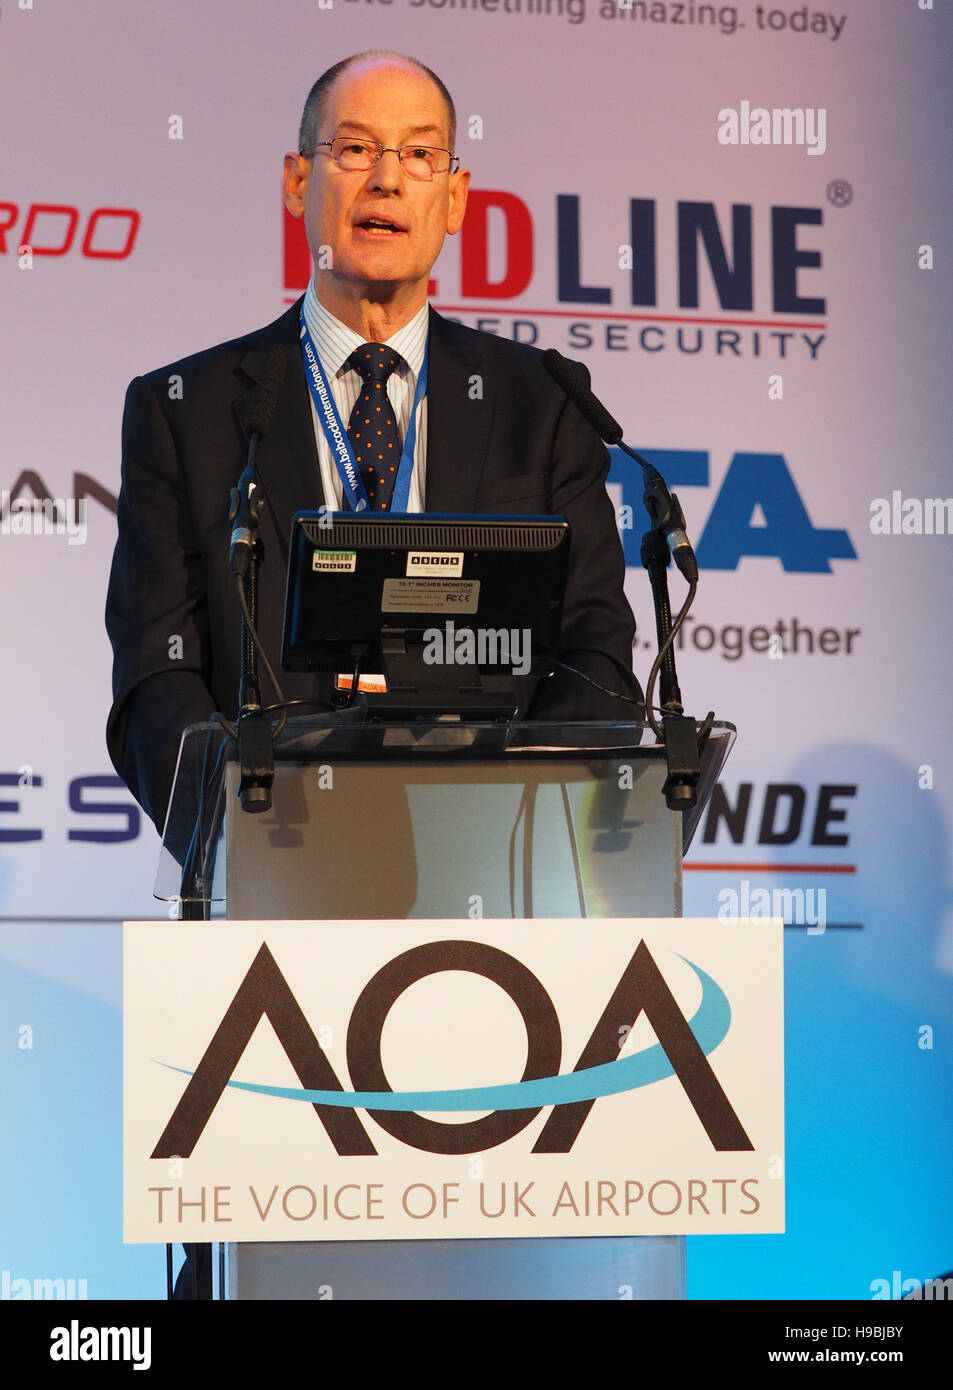 London, UK. 21st Nov, 2016. Ed Anderson Chairman of The Airports Operators Association (AOA) conference in London. Credit:  Dorset Media Service/Alamy Live News Stock Photo